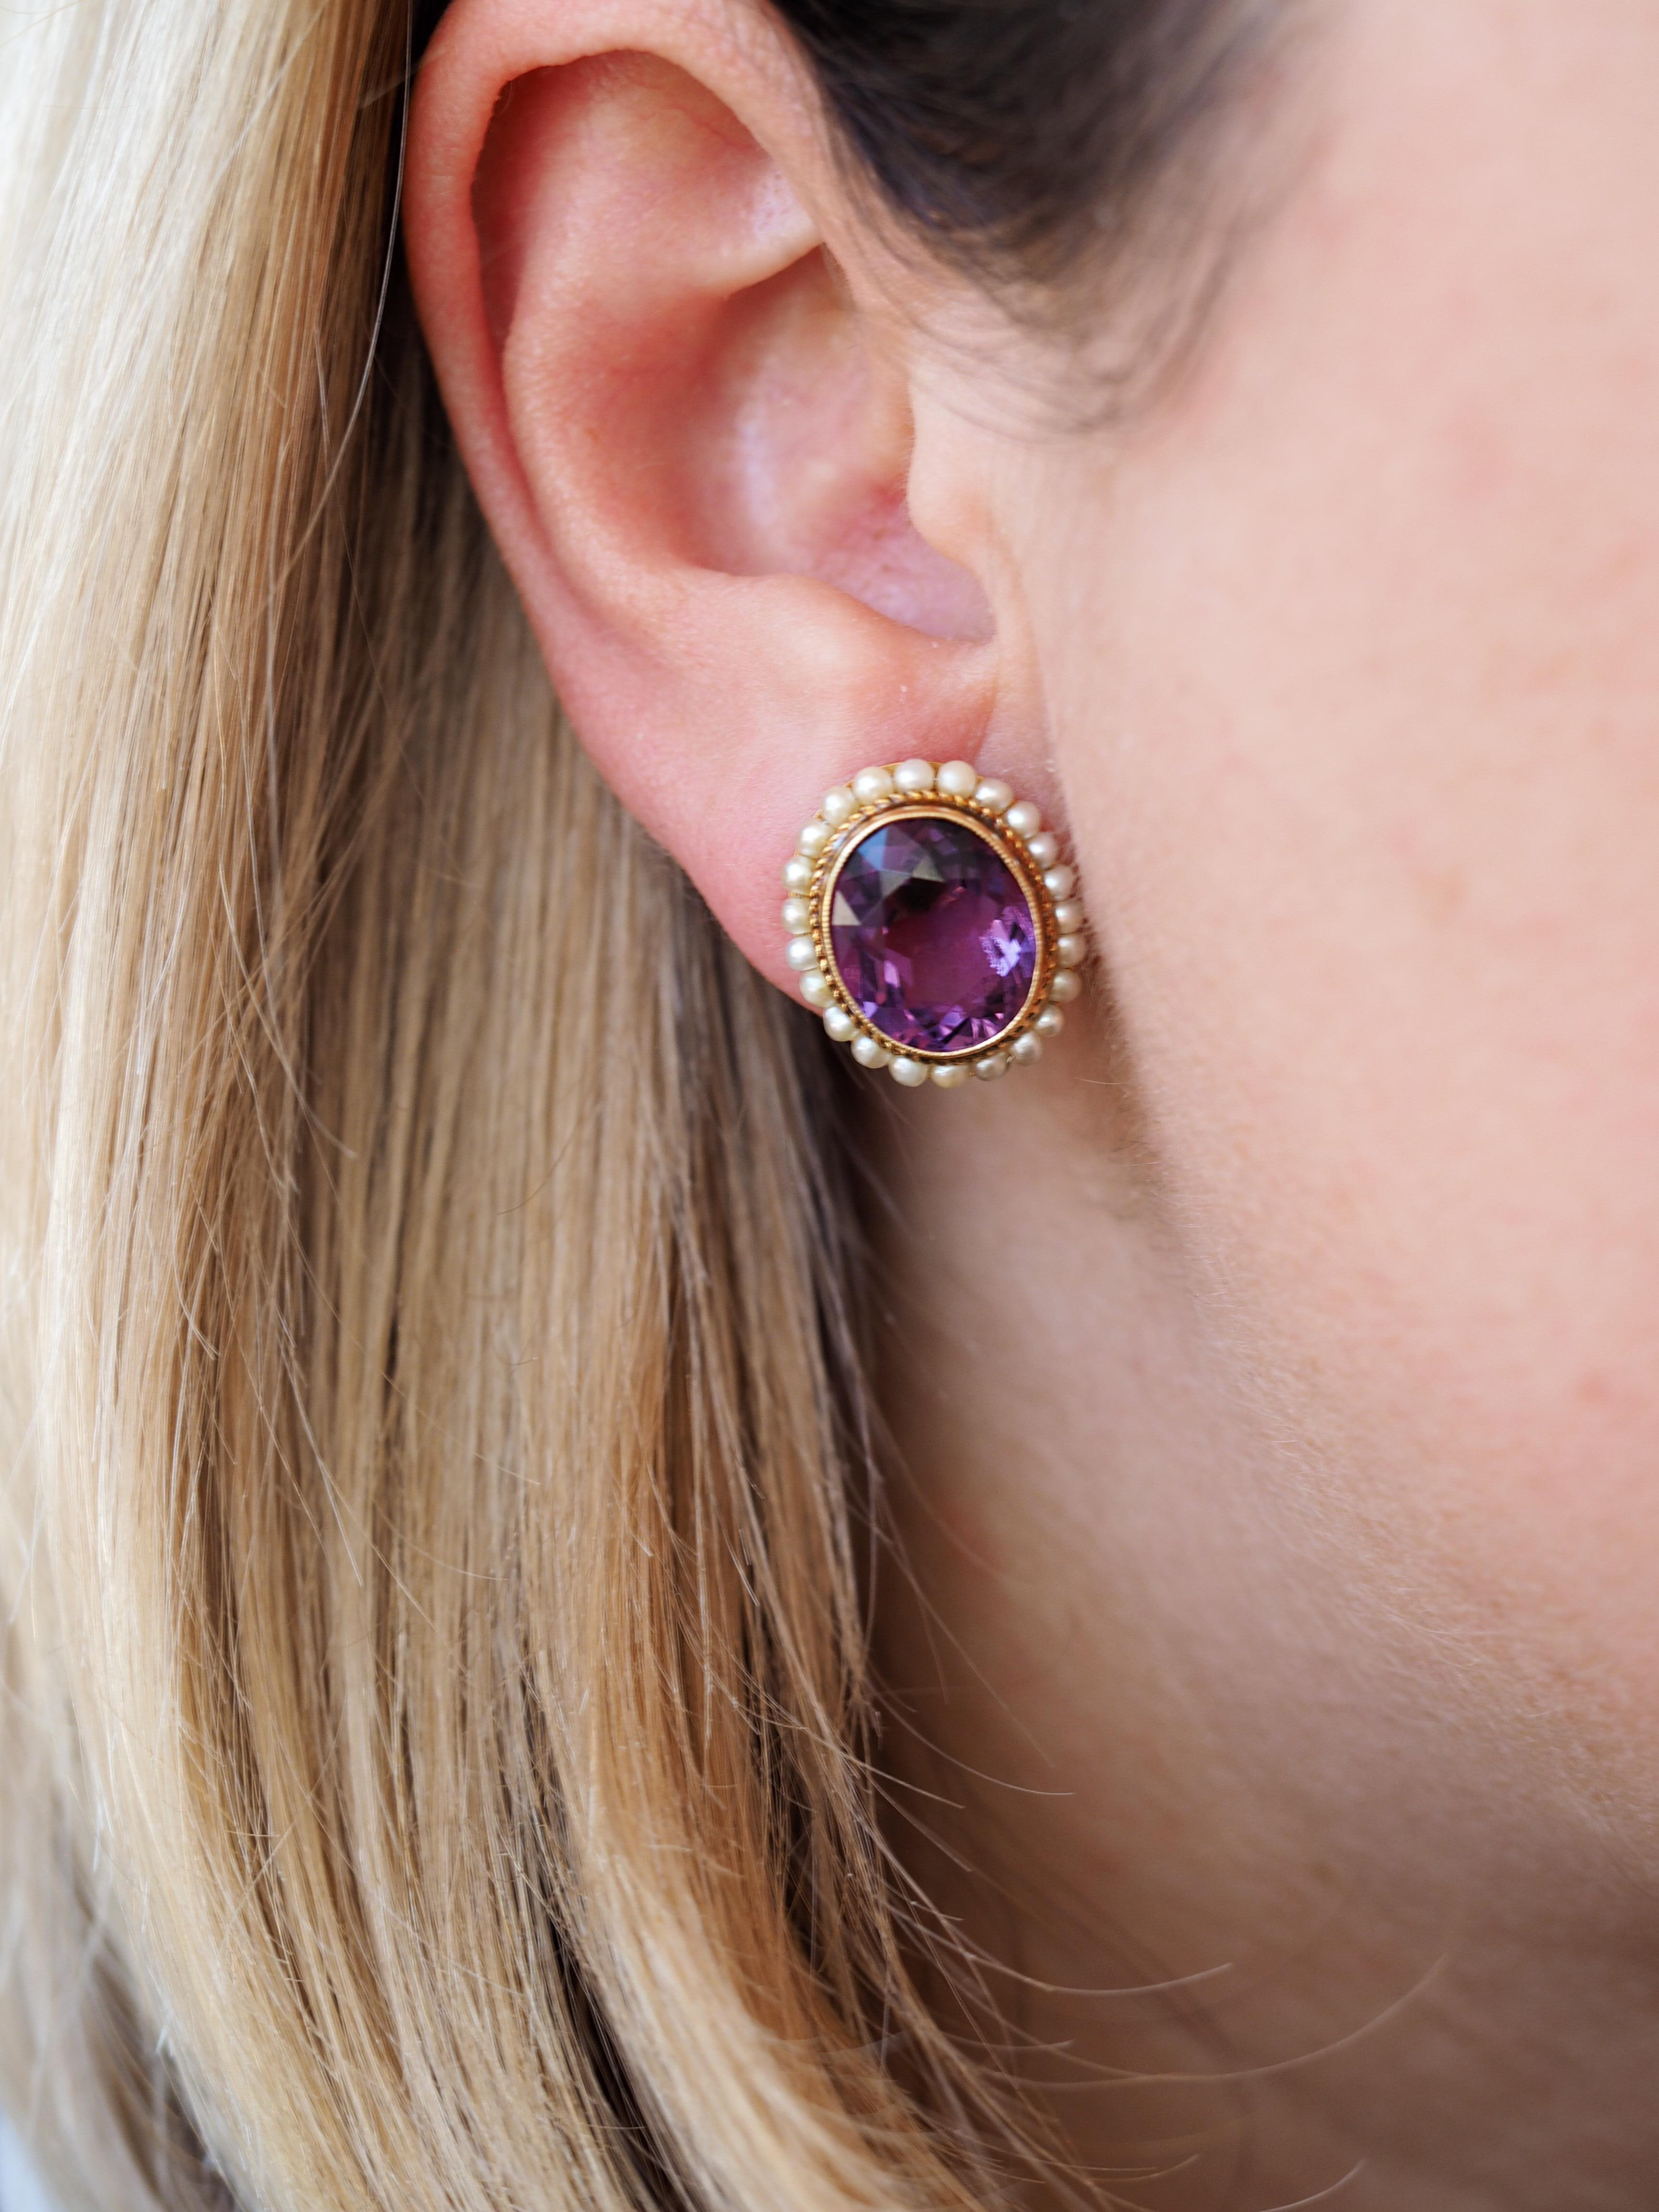 14 Karat Yellow Gold Victorian Style Oval Amethyst Earrings Bezel Set and Framed by Seed Pearls  The earrings feature a matched pair of faceted oval amethyst measuring 11.68 x 9.78 x 6.61 mm and 11.79 x 9.90 x 6.68 mm and weighing approximately 8.13